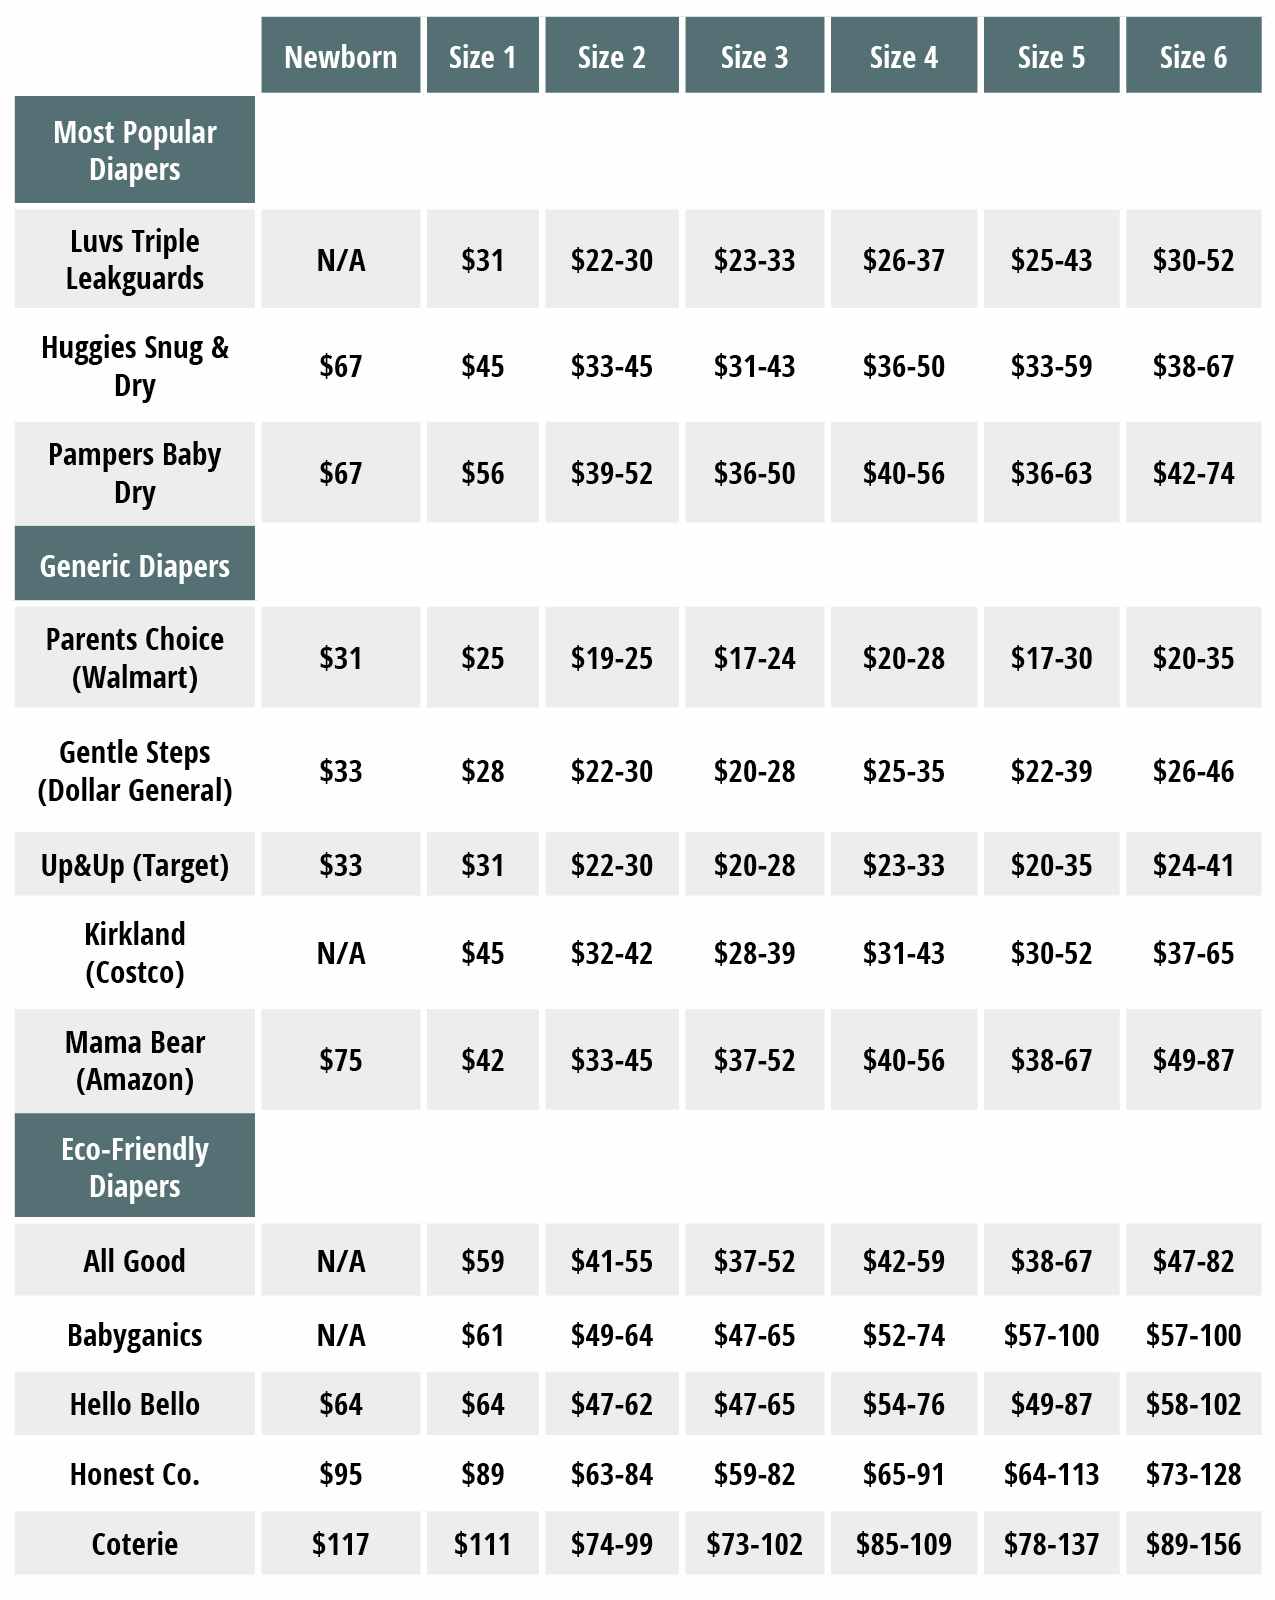 popular diaper brands and cost per month for diapers by size